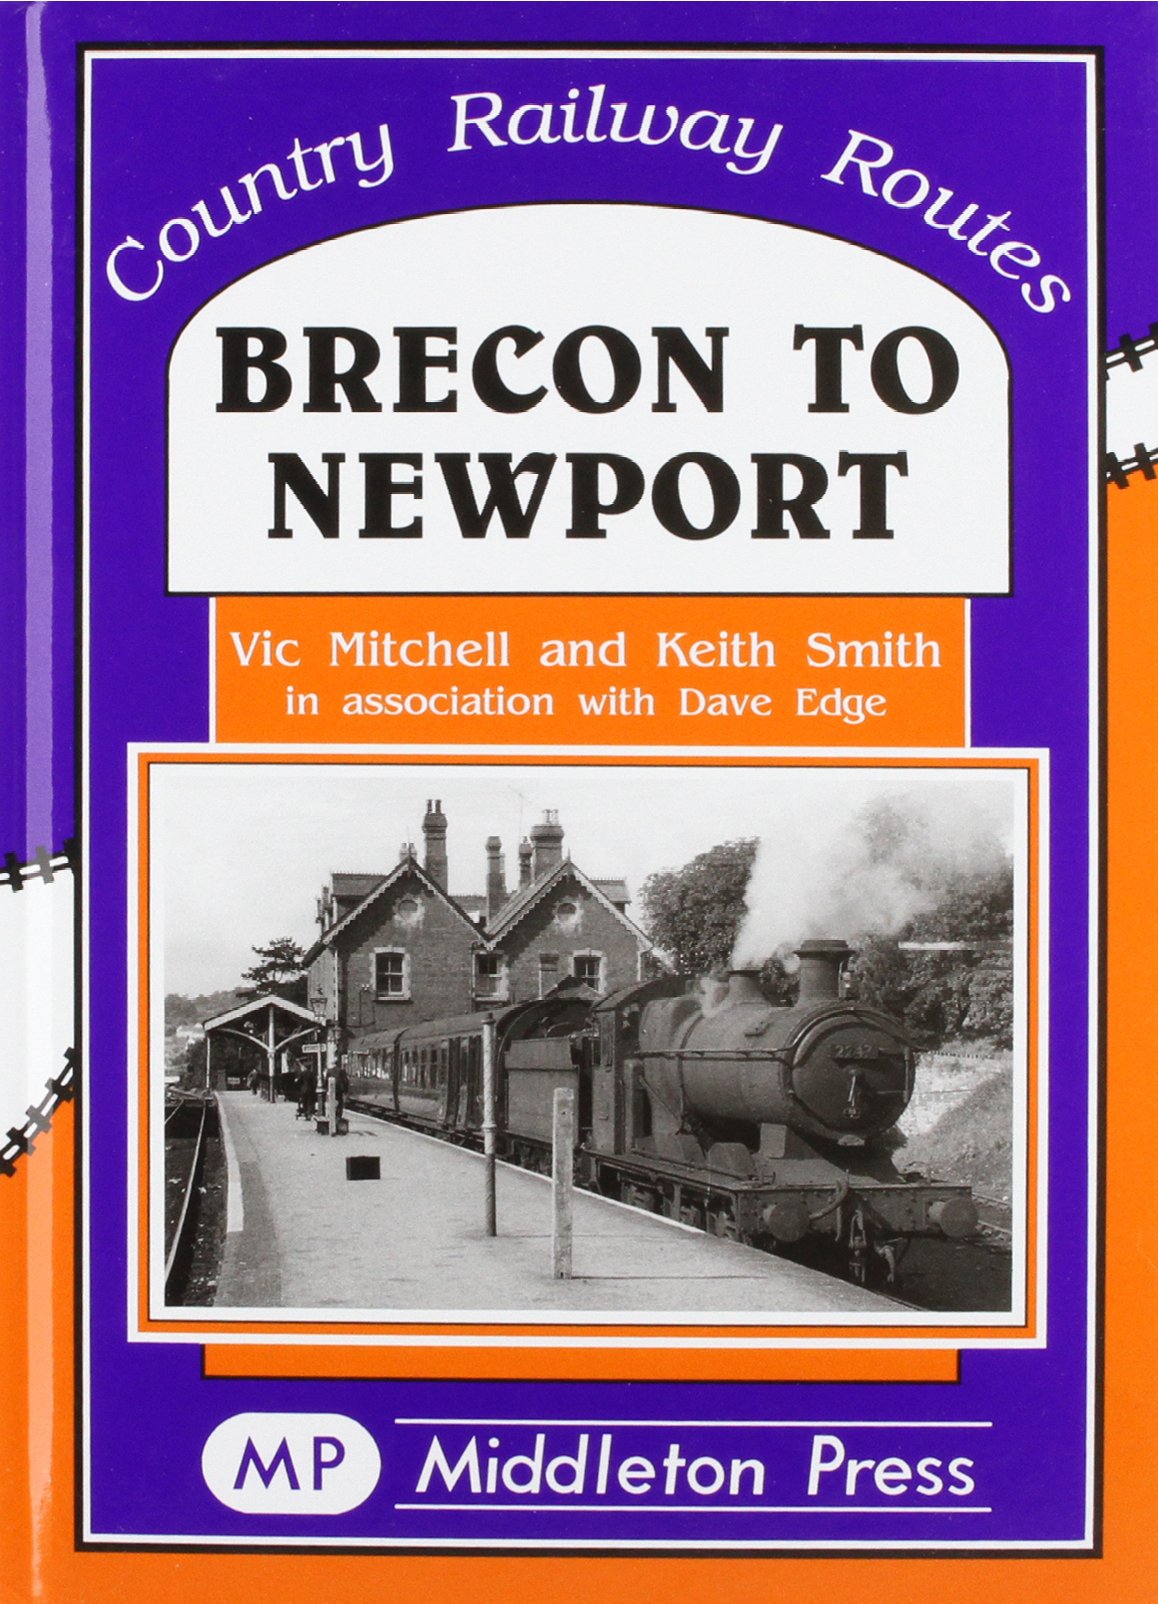 Country Railway Routes Brecon to Newport including the Dowlais Central Branch